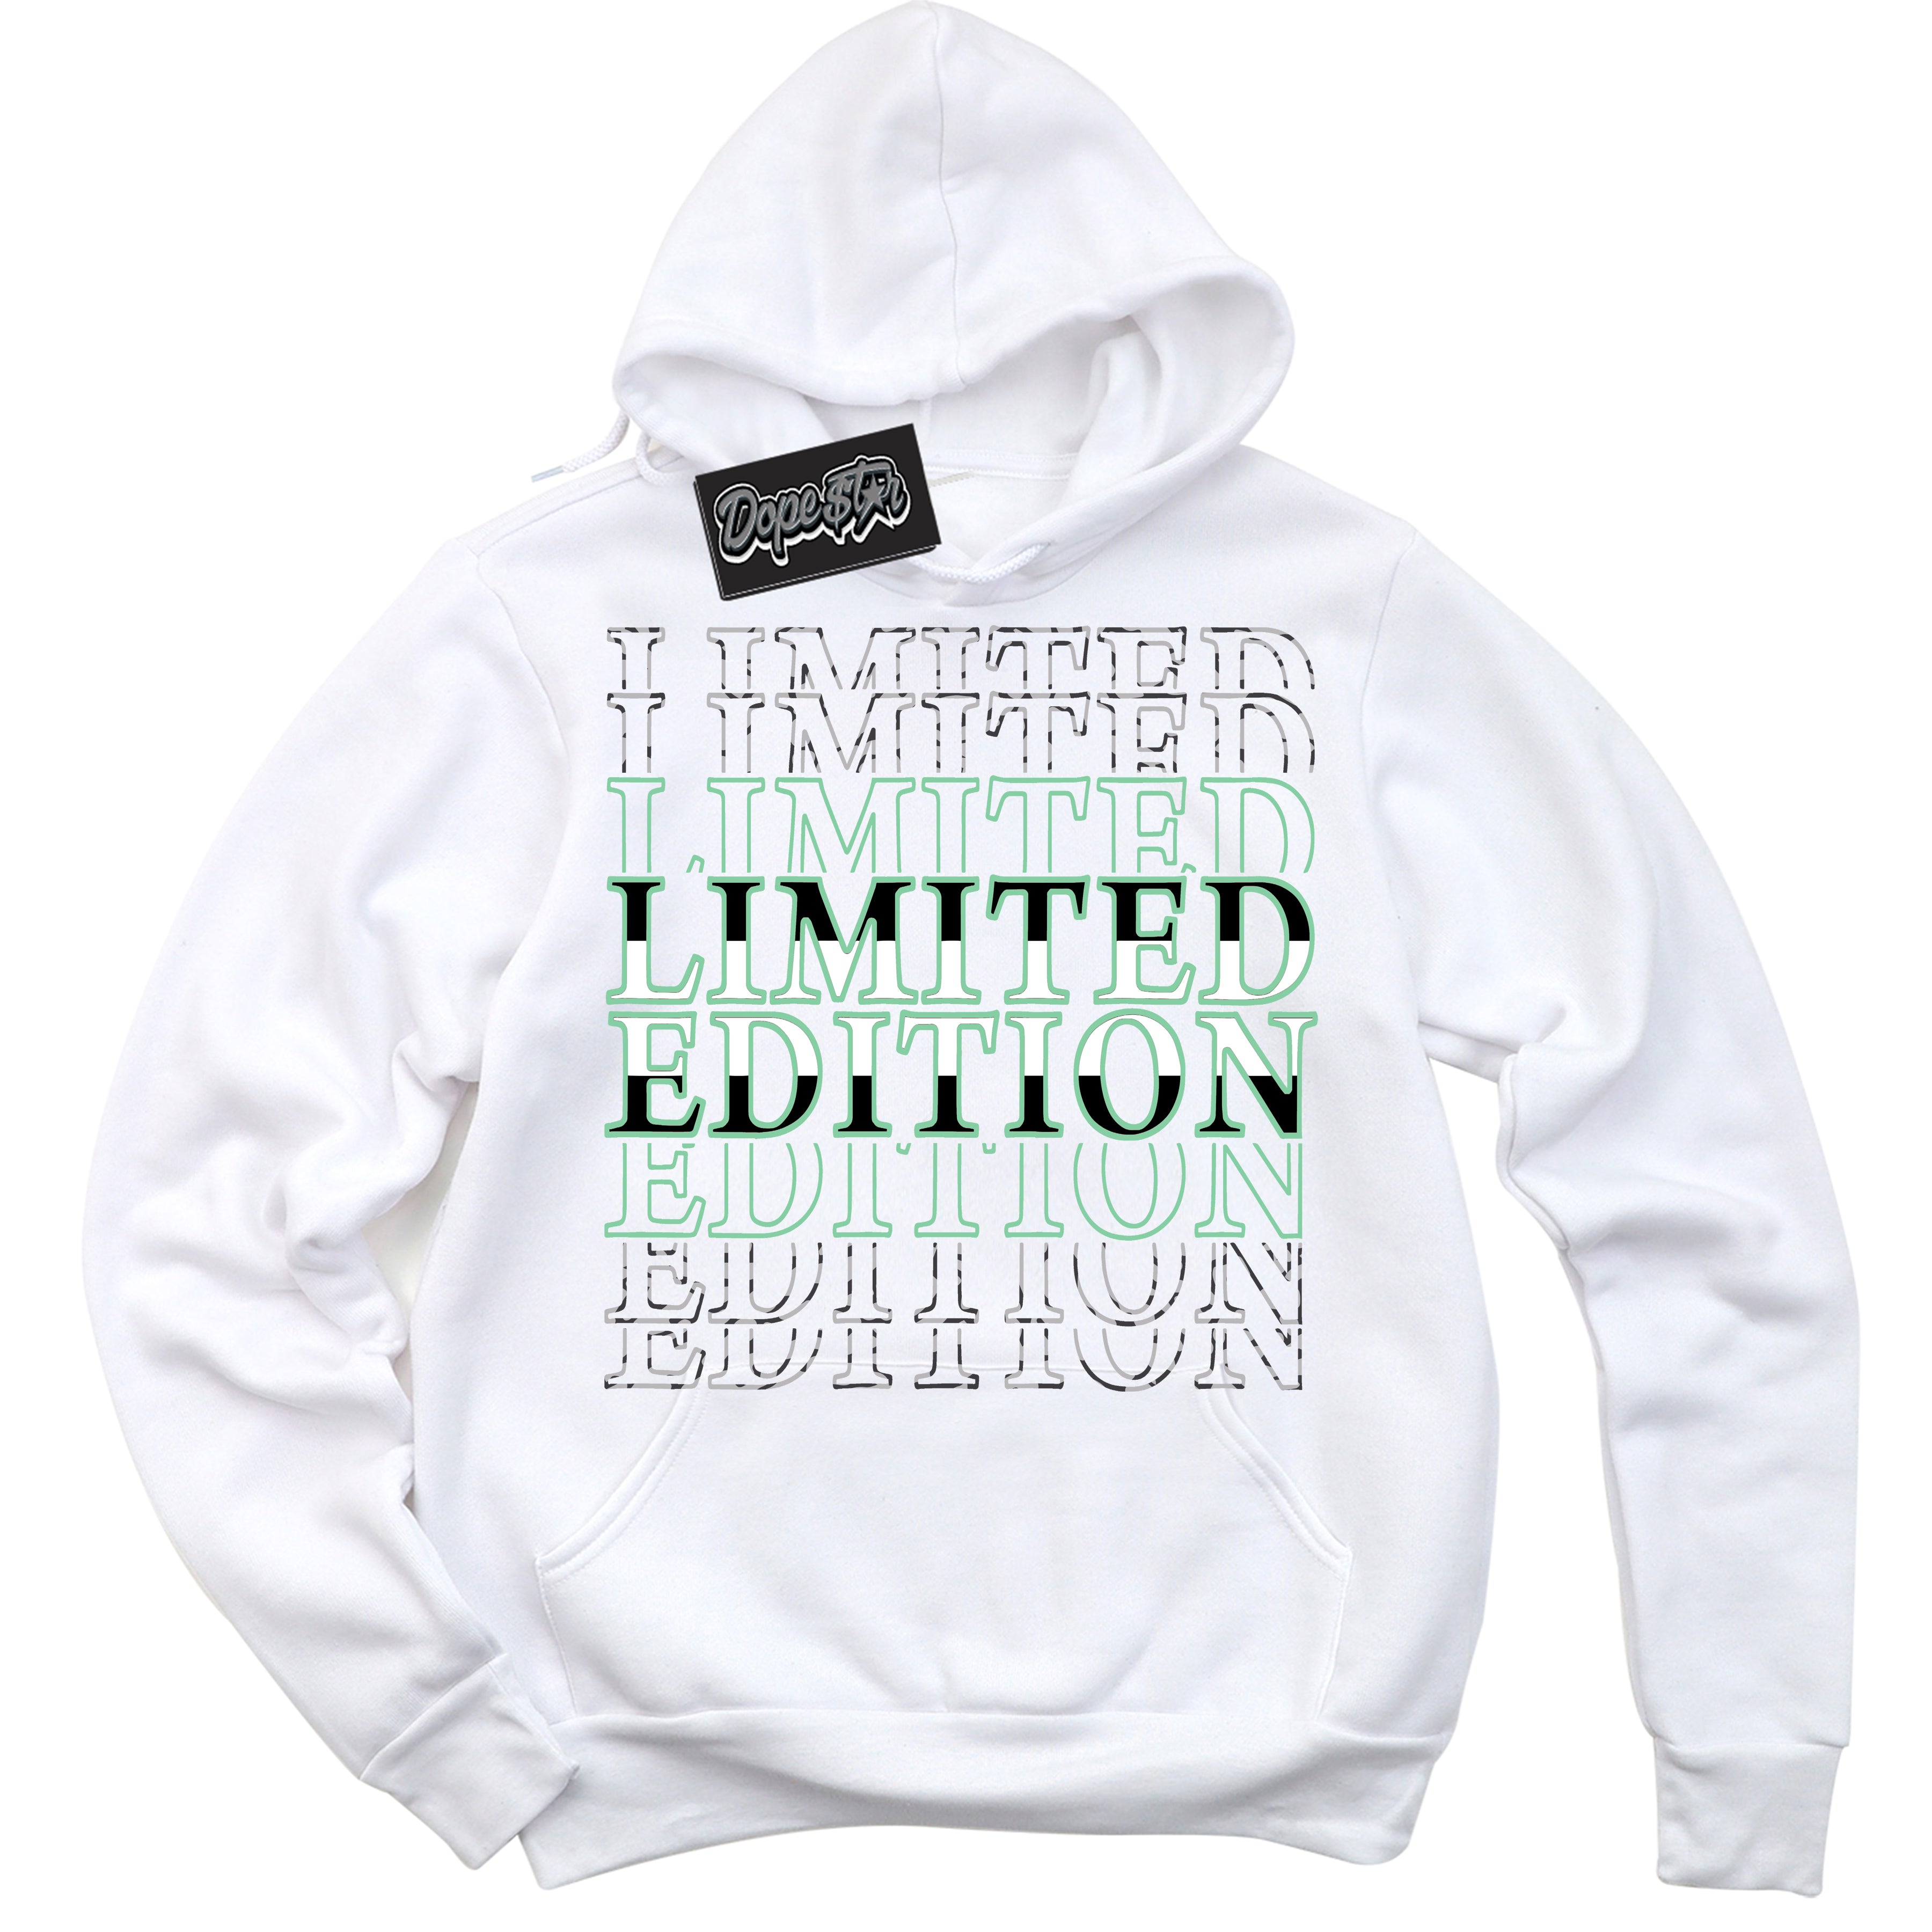 Cool White Graphic DopeStar Hoodie with “ Limited Edition “ print, that perfectly matches Green Glow 3s sneakers